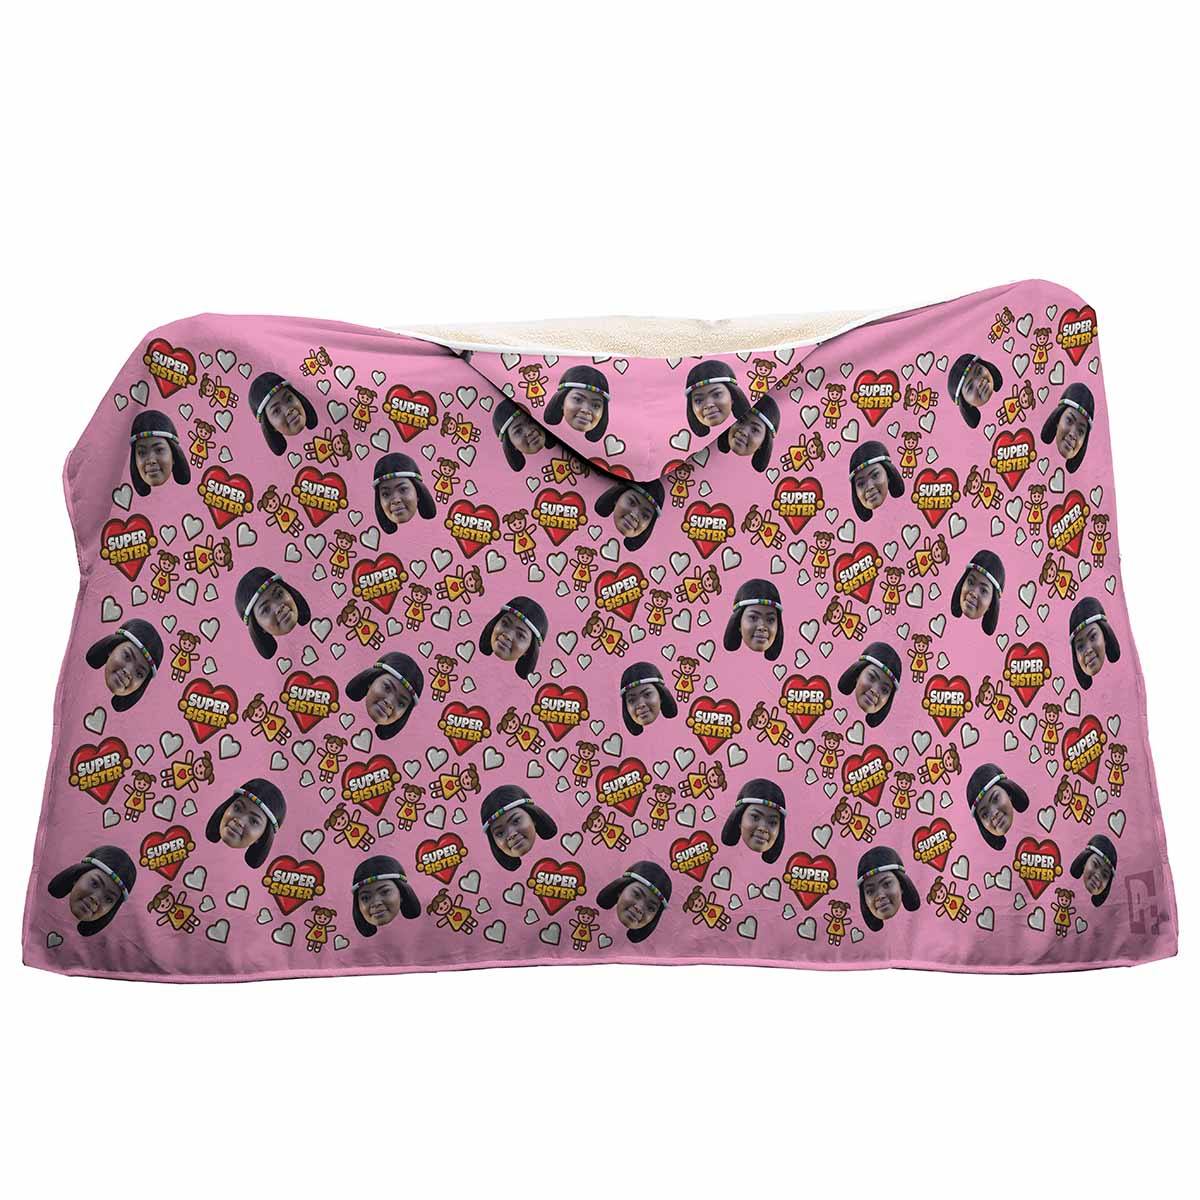 pink Super Sister hooded blanket personalized with photo of face printed on it